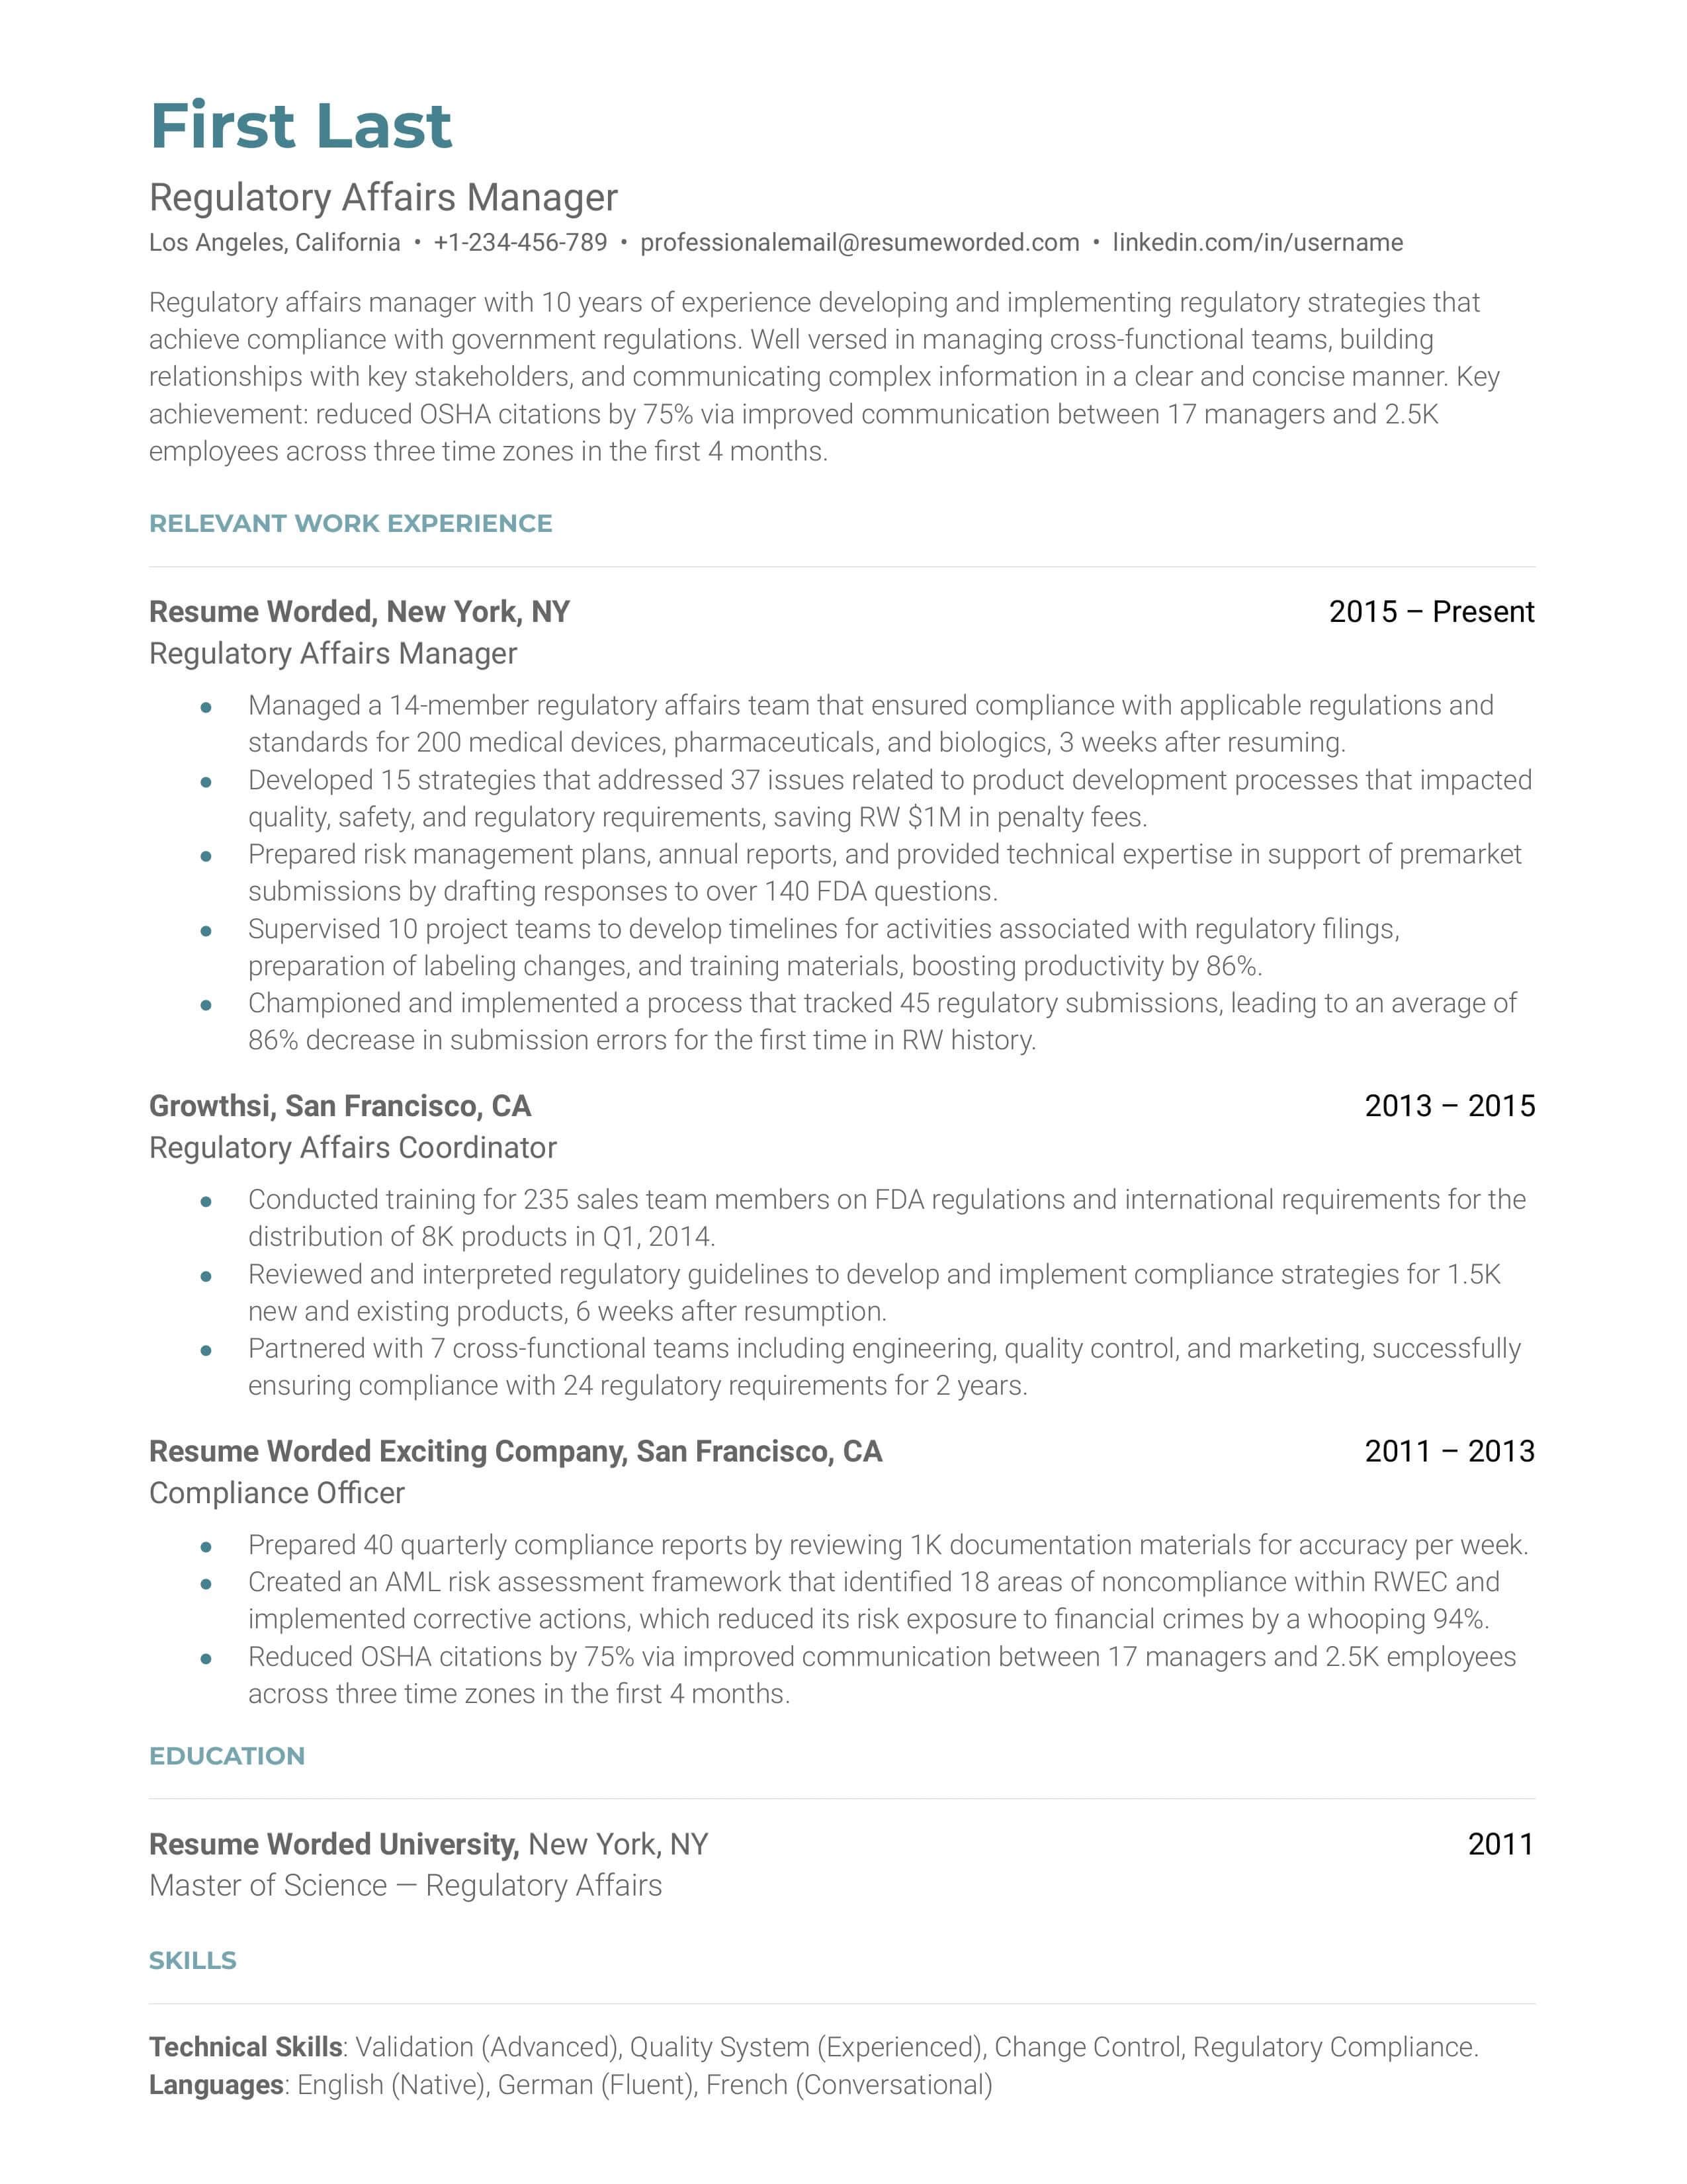 A regulatory affairs manager resume example that emphasizes industry experience